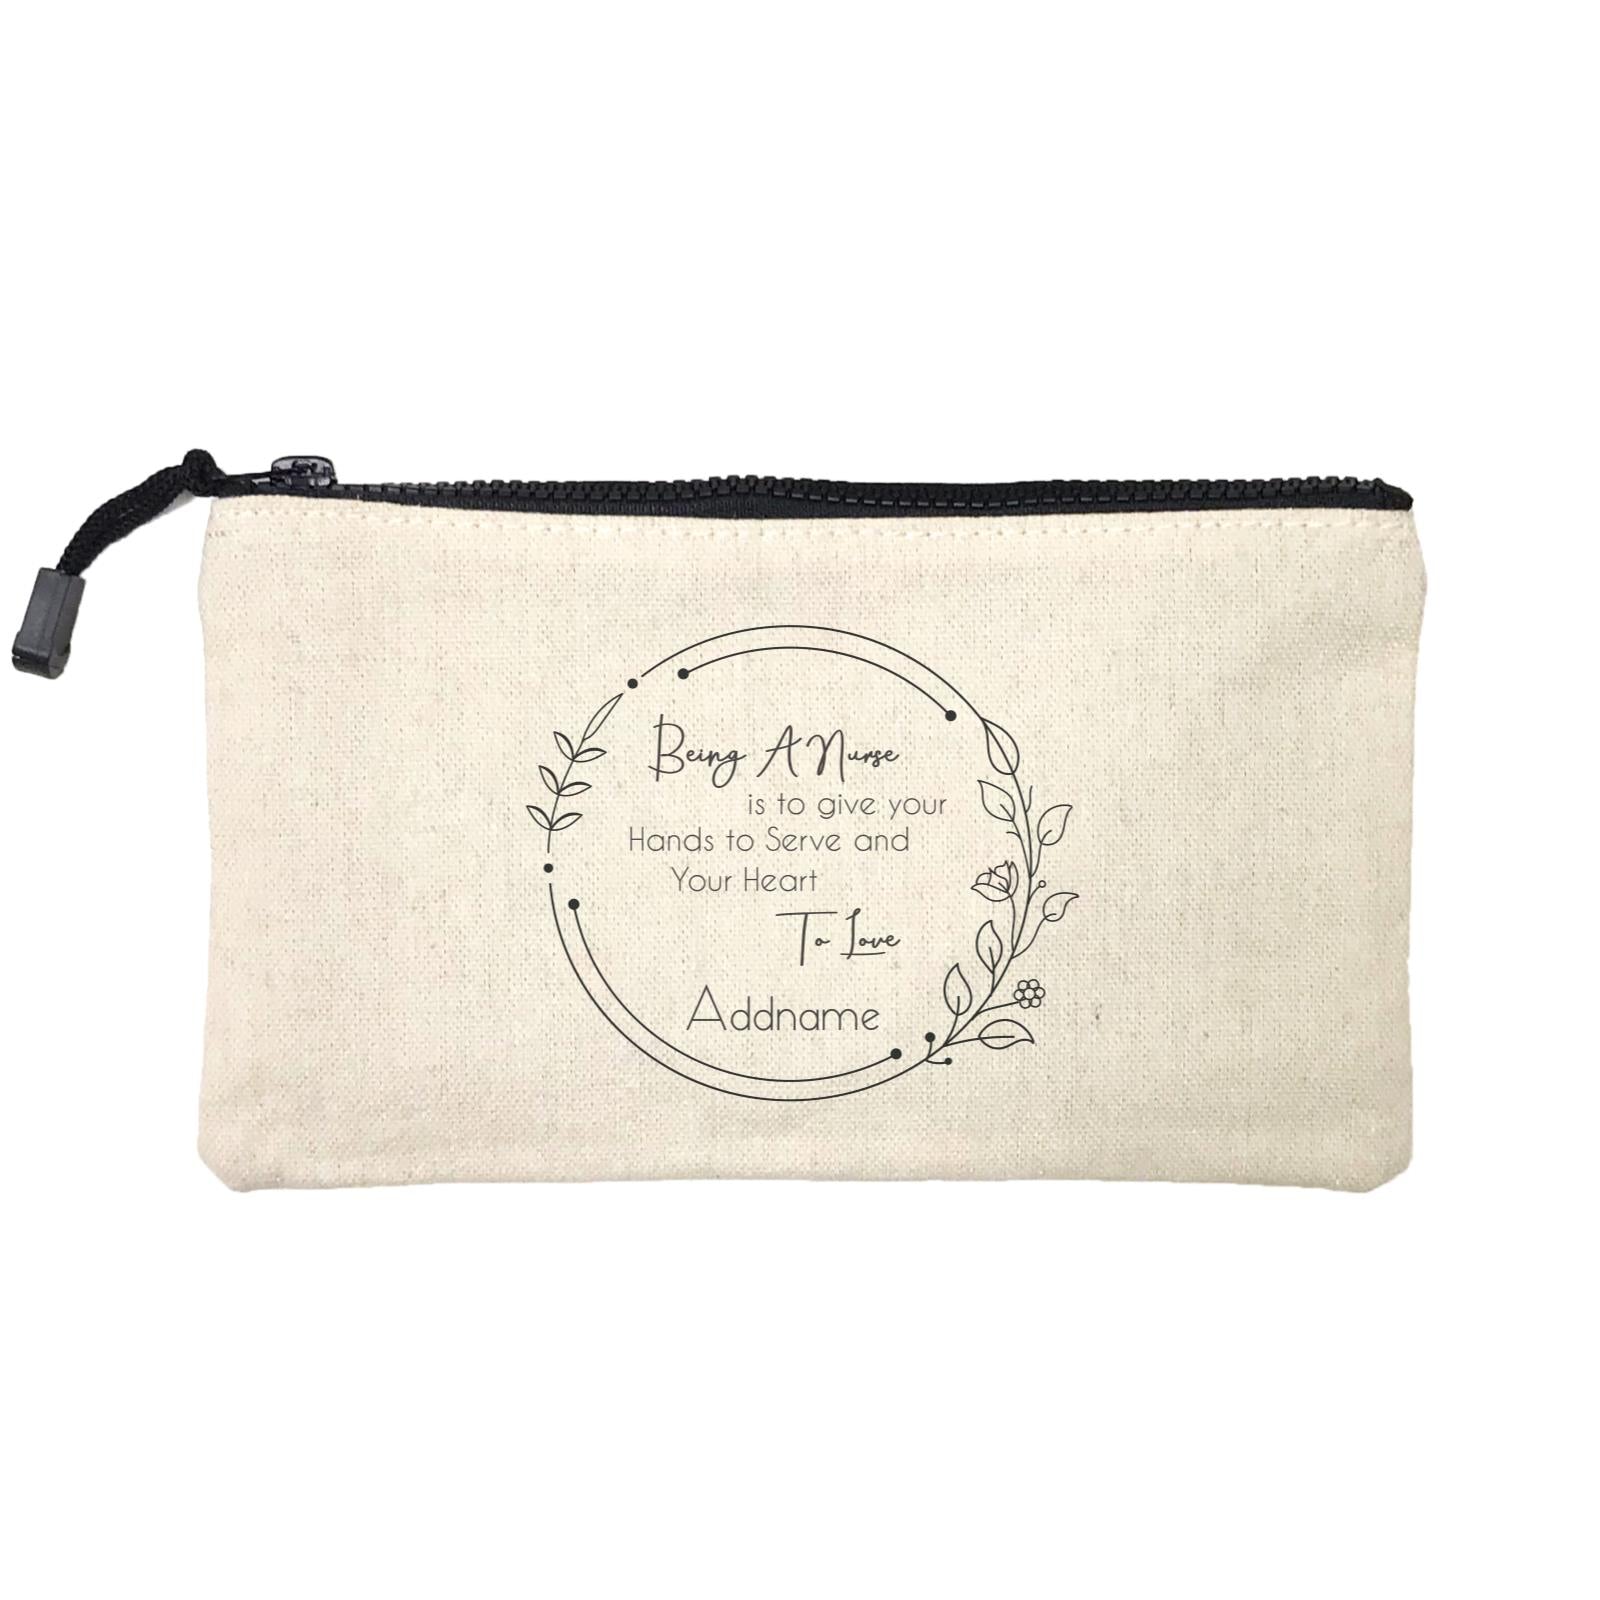 Being A Nurse is to give your Hands to Serve and Your Heart To Love Mini Accessories Stationery Pouch